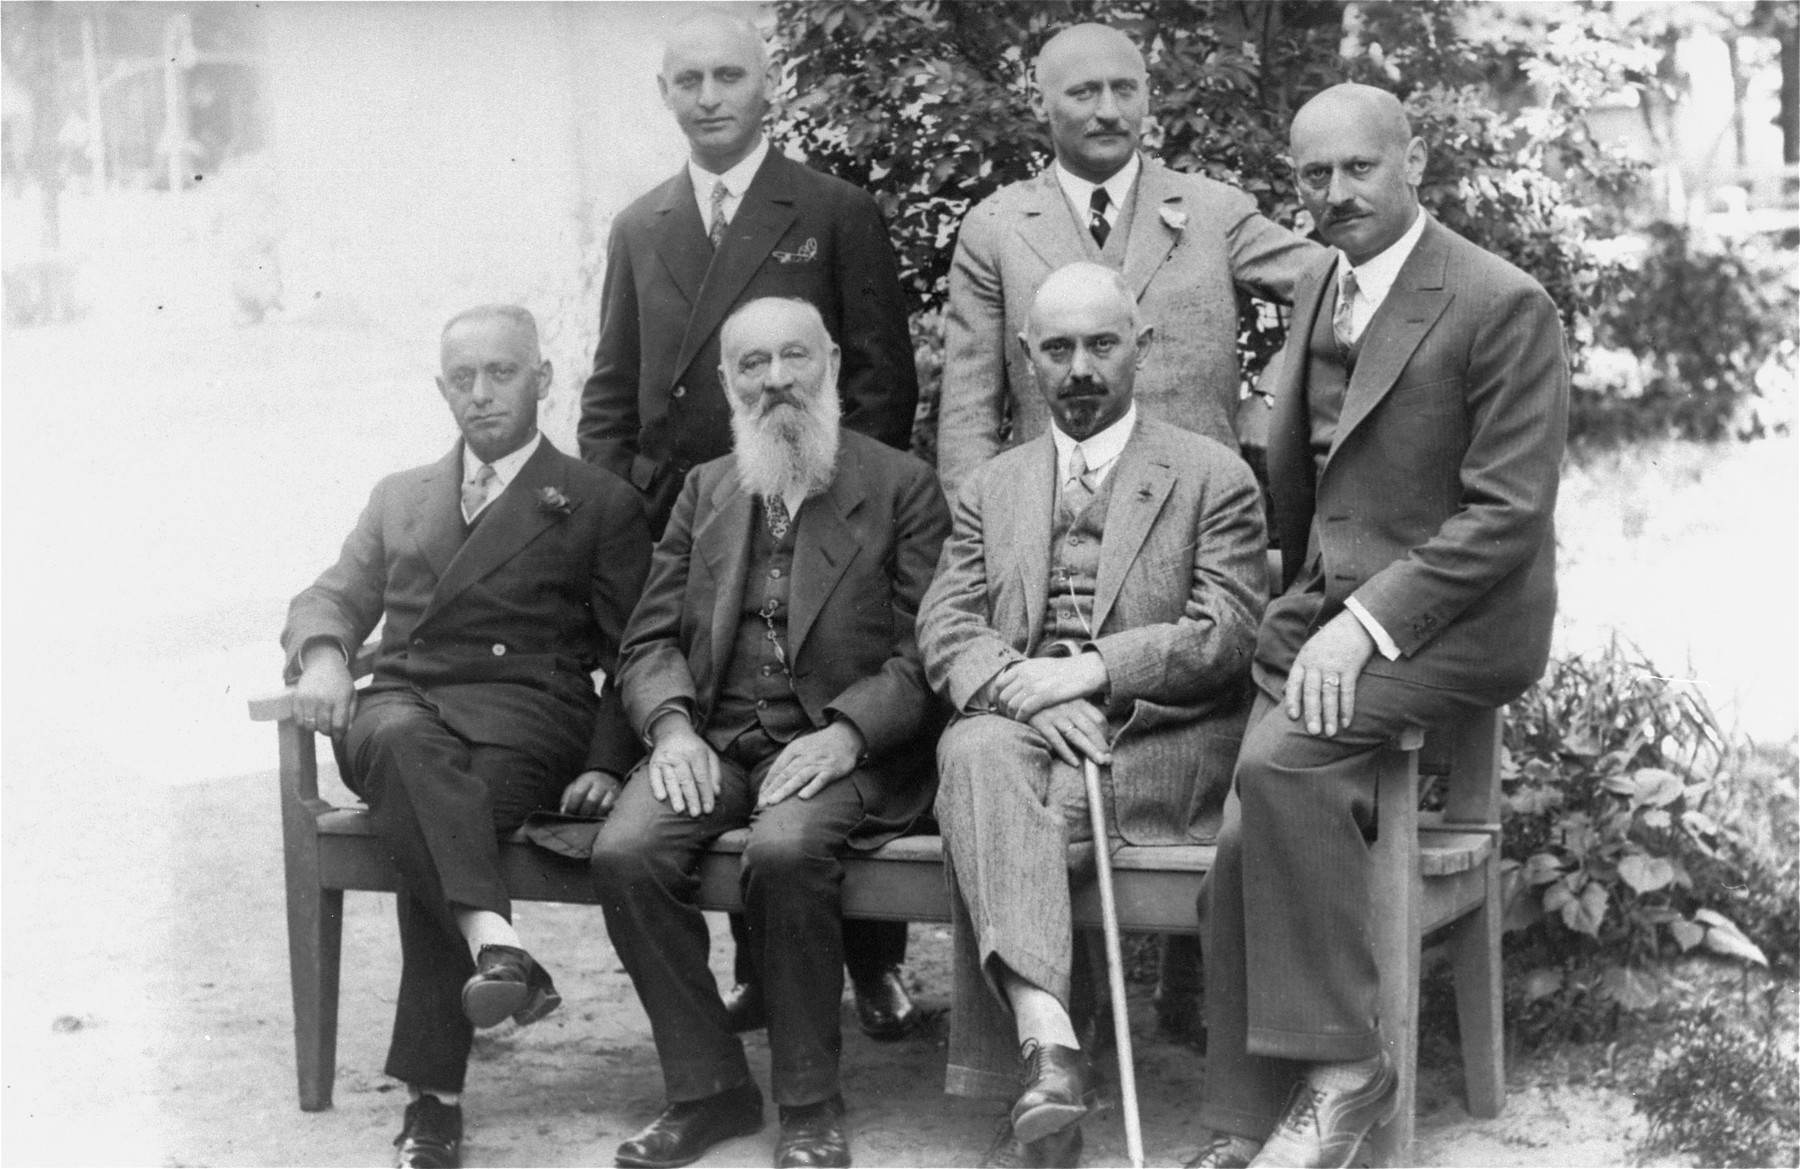 Simon Anker (front row, second from the left) poses with his five sons in Zoppot, a suburb of Danzig.  

Pictured in the front row are: Heinrich, Simon, and Arthur Anker.  In the back row are: Paul, Leo, and Georg Anker.  With the exception of Georg, all lived in Danzig and were active in the family grain business.  Georg, ran a men's clothing manufacturing business in Berlin.  During the Nazi period Heinrich, Arthur, Paul, and Leo left Danzig in October, 1938.  Georg left Berlin in July 1939.  Heinrich, Arthur, Paul, and Georg settled in Los Angeles, while Leo settled in London.